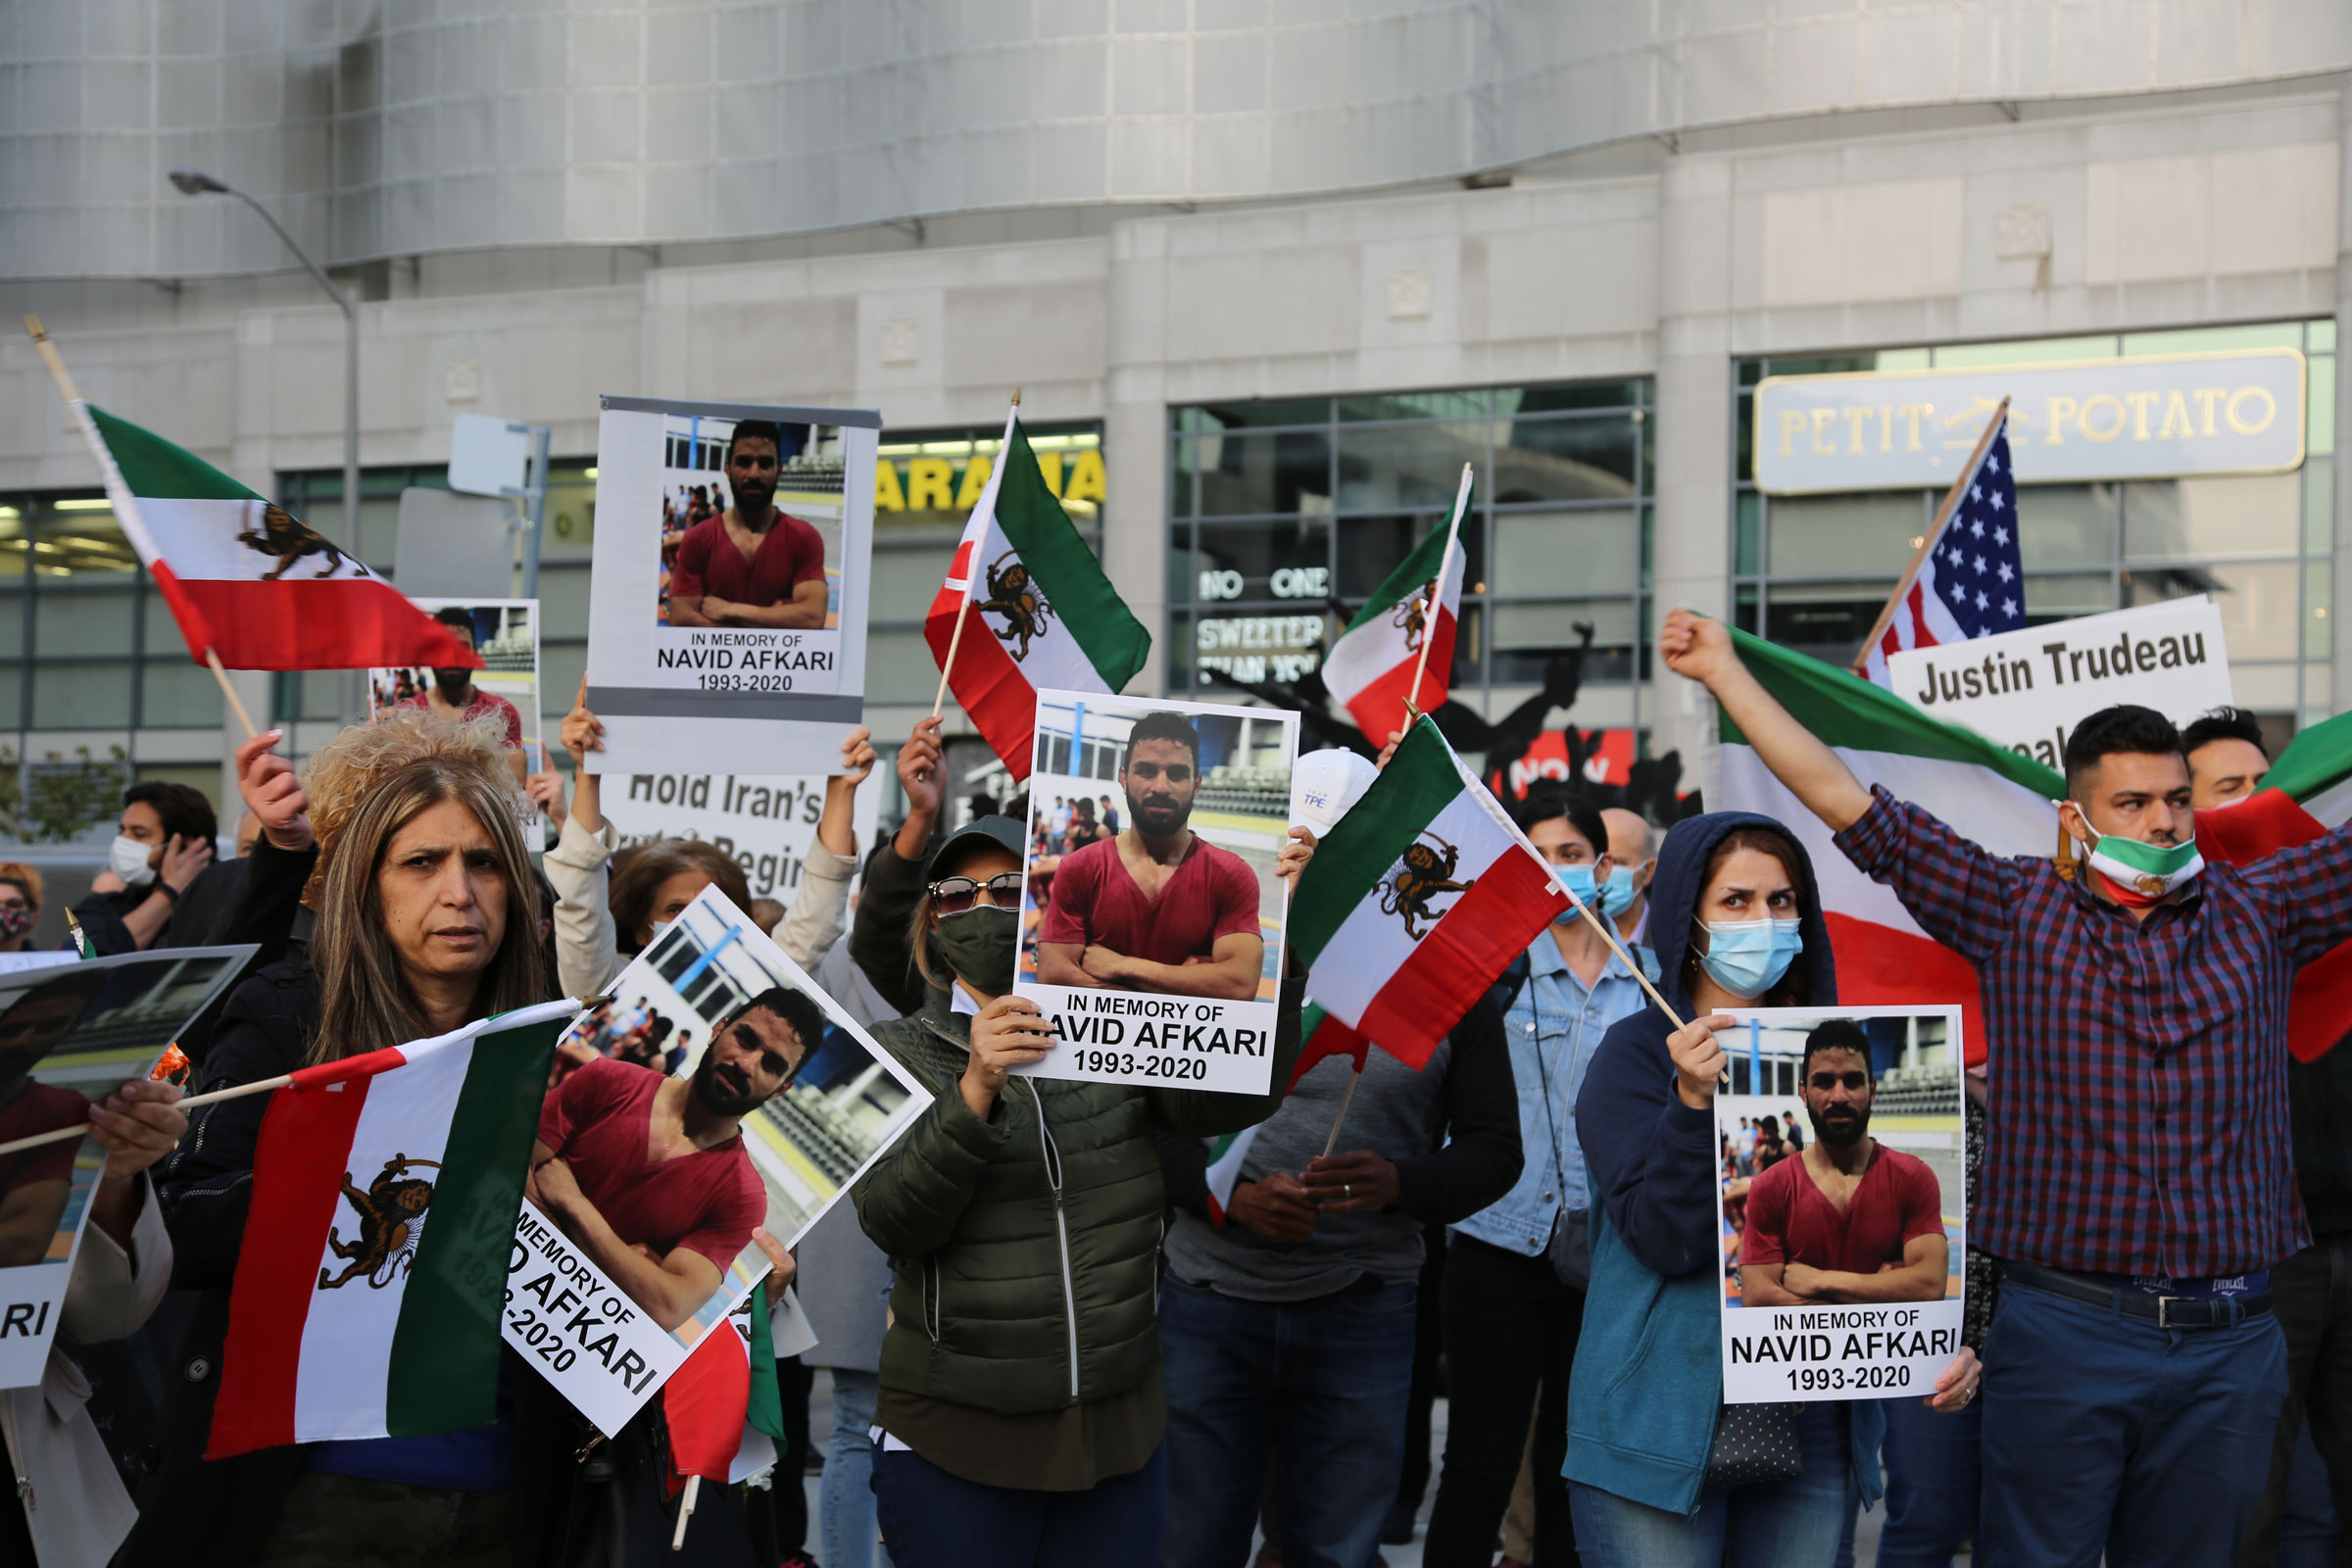 Iranians in Canada demonstrate against the execution of wrestler Navid Afkari by the Iranian regime, in Toronto on September 15, 2020. (Sayed Najafizada/NurPhoto)